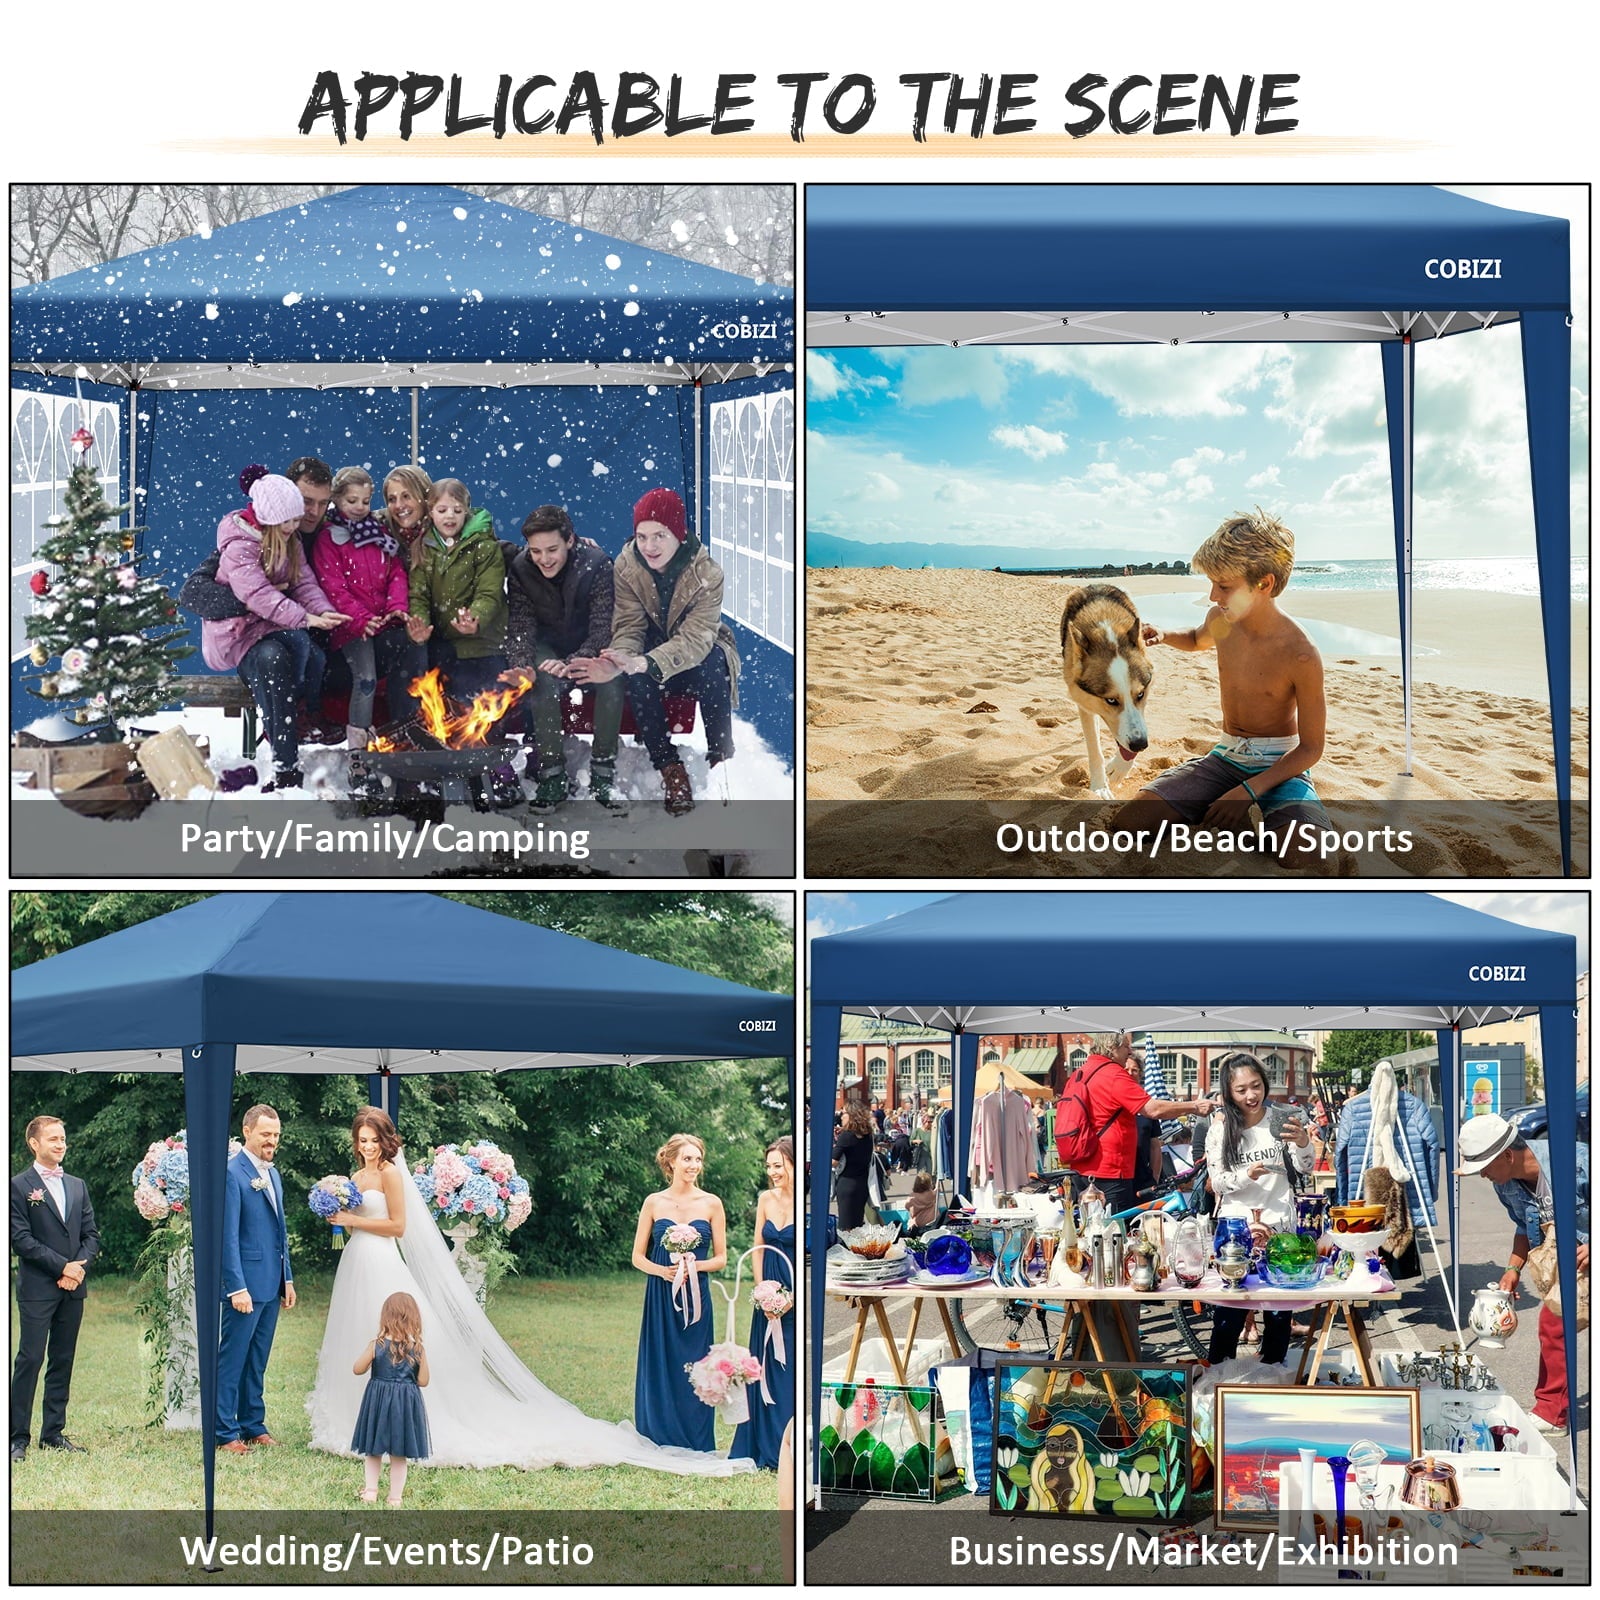 10 x 10ft Pop Up Canopy Tent Instant Outdoor Party Canopy Straight Leg Commercial Gazebo Tent Shelter with 4 Removable Sidewalls and Carrying Bag, Blue